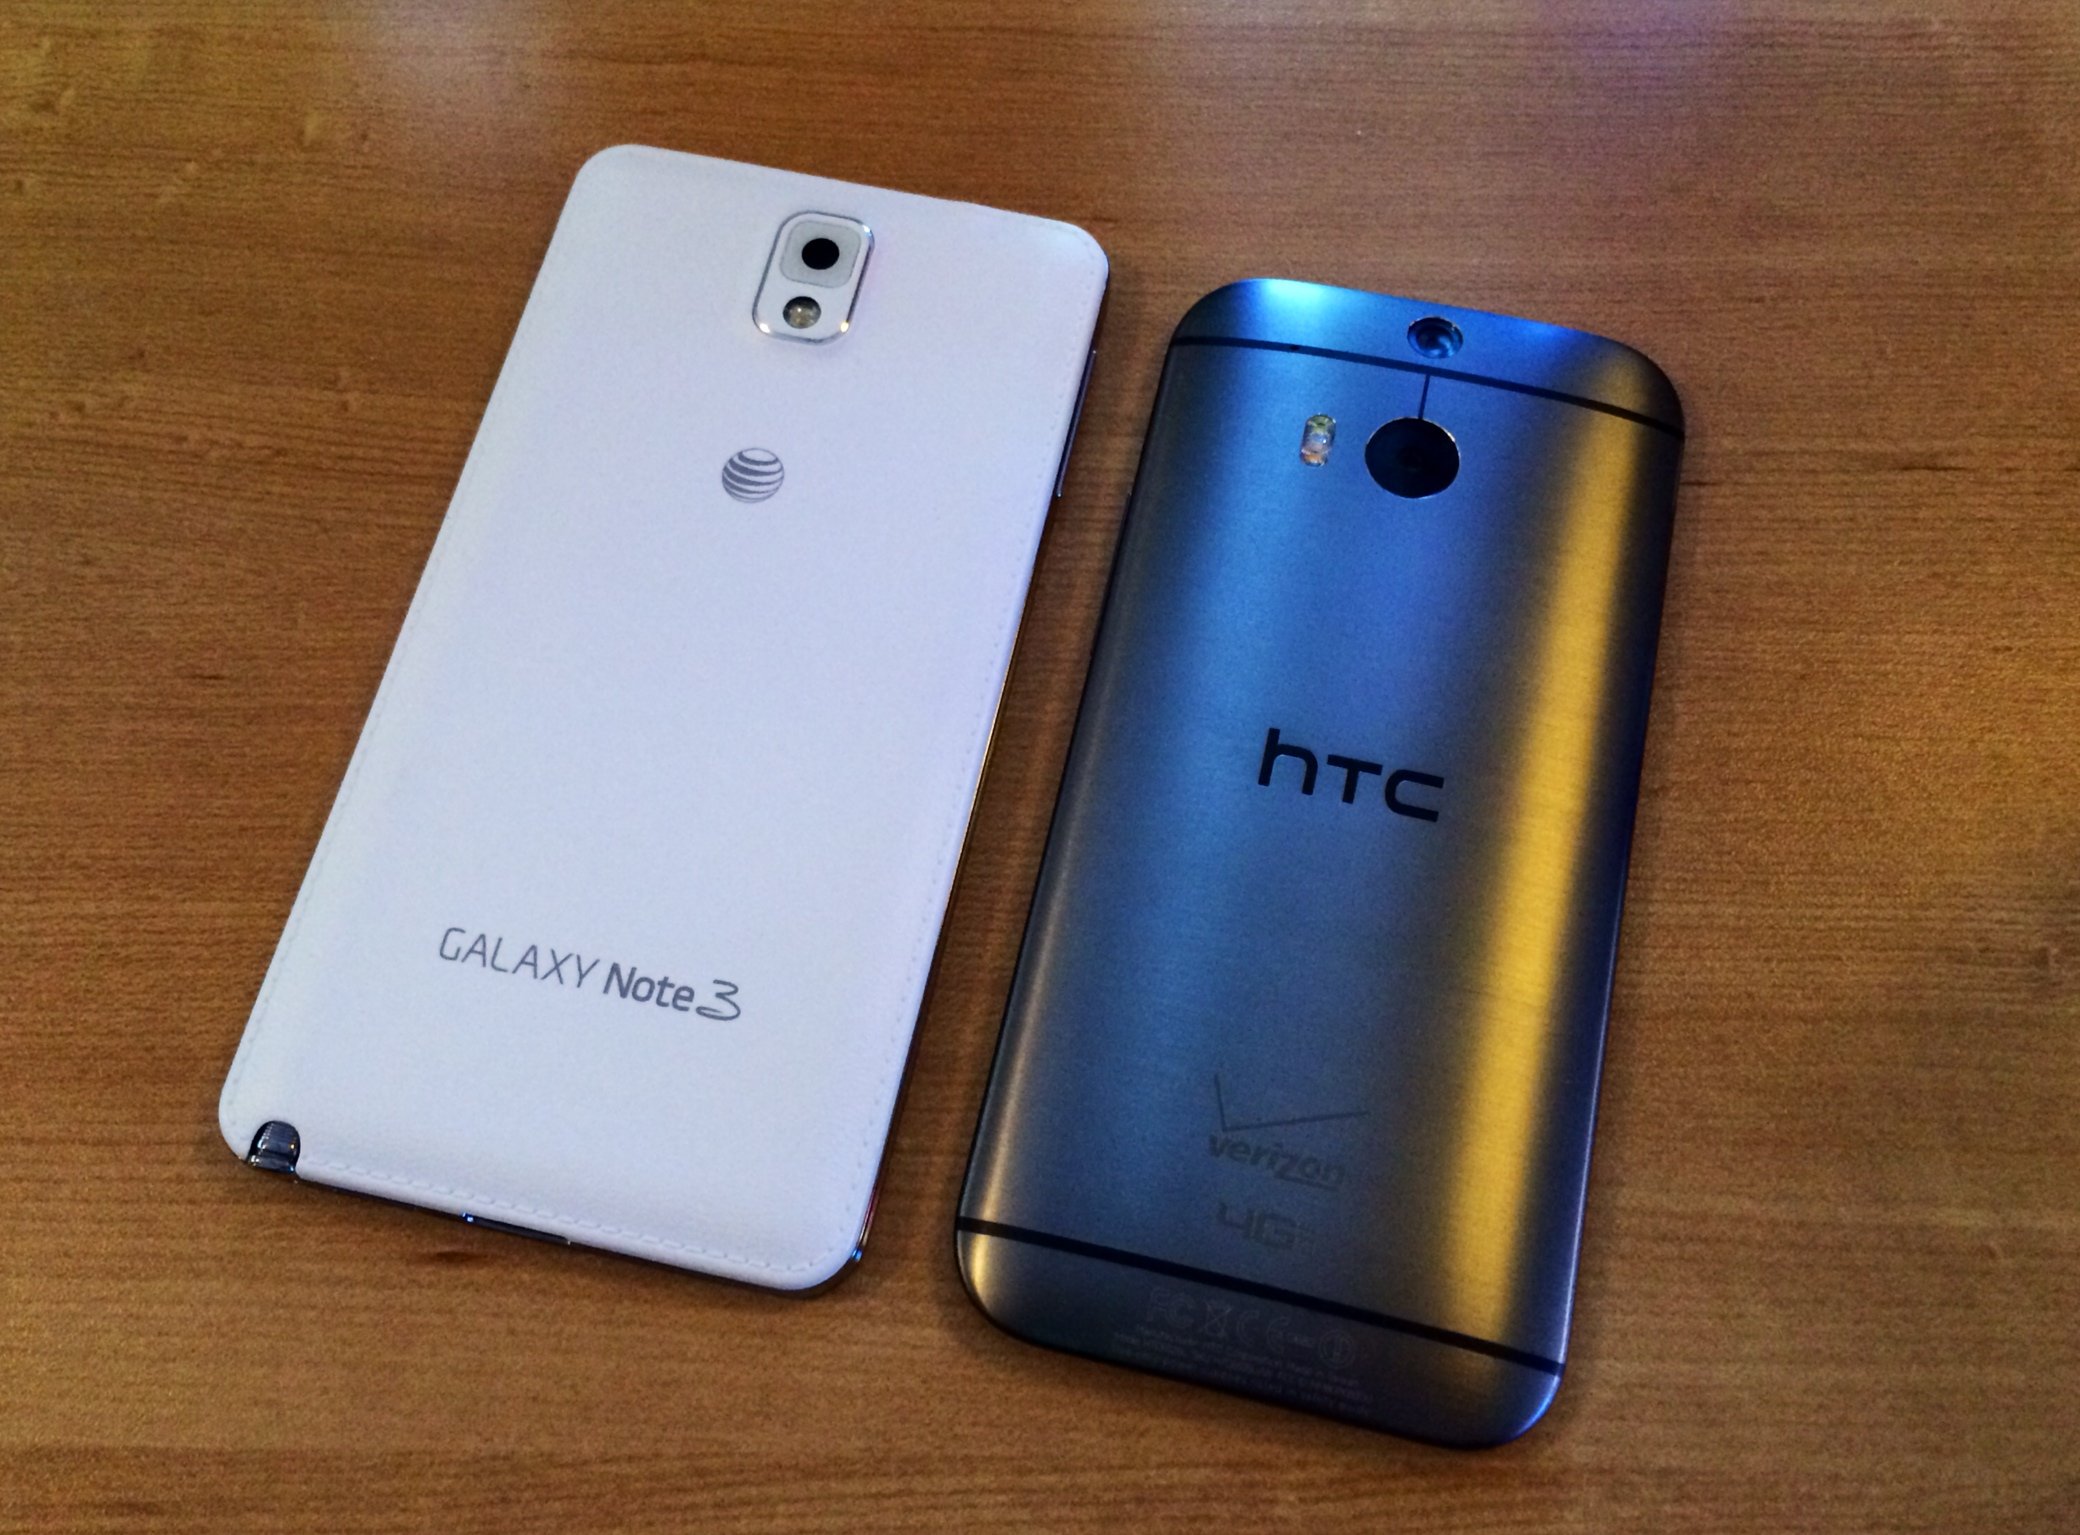 The new HTC One is larger than last year's model, but still smaller than the Galaxy Note 3.